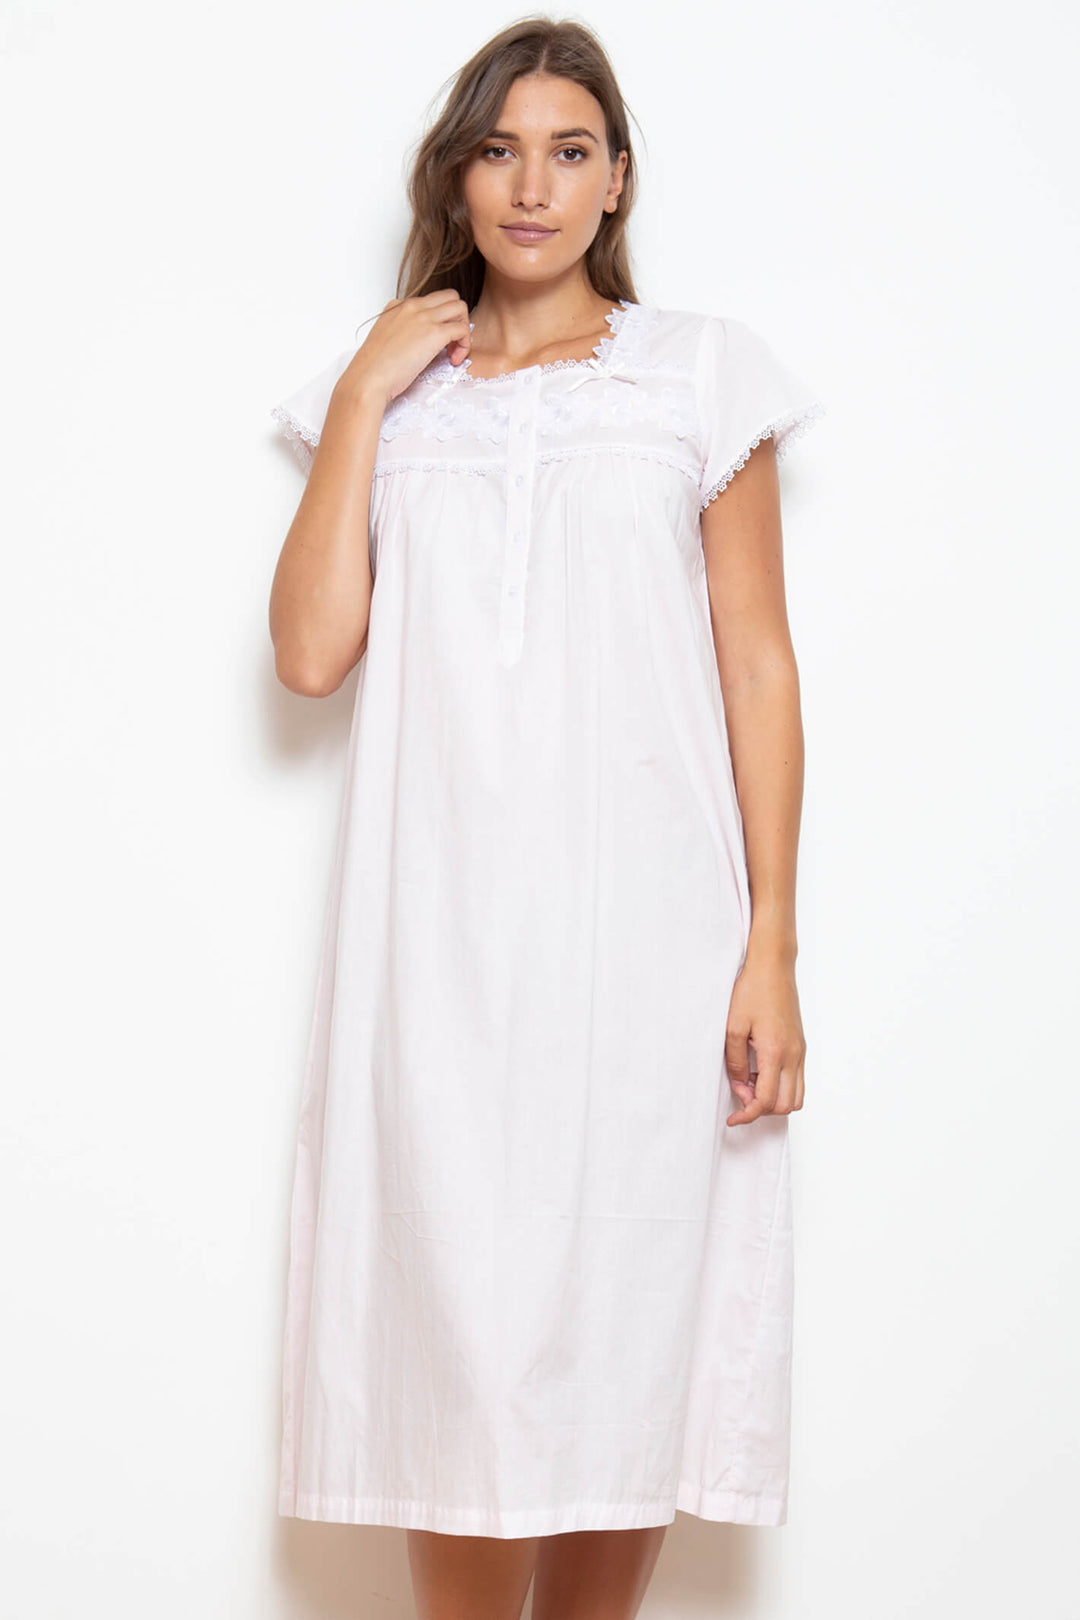 Cottonreal Hera Cotton Lawn Broderie Anglais Cap Sleeves Nightdress - Shirley Allum Boutique